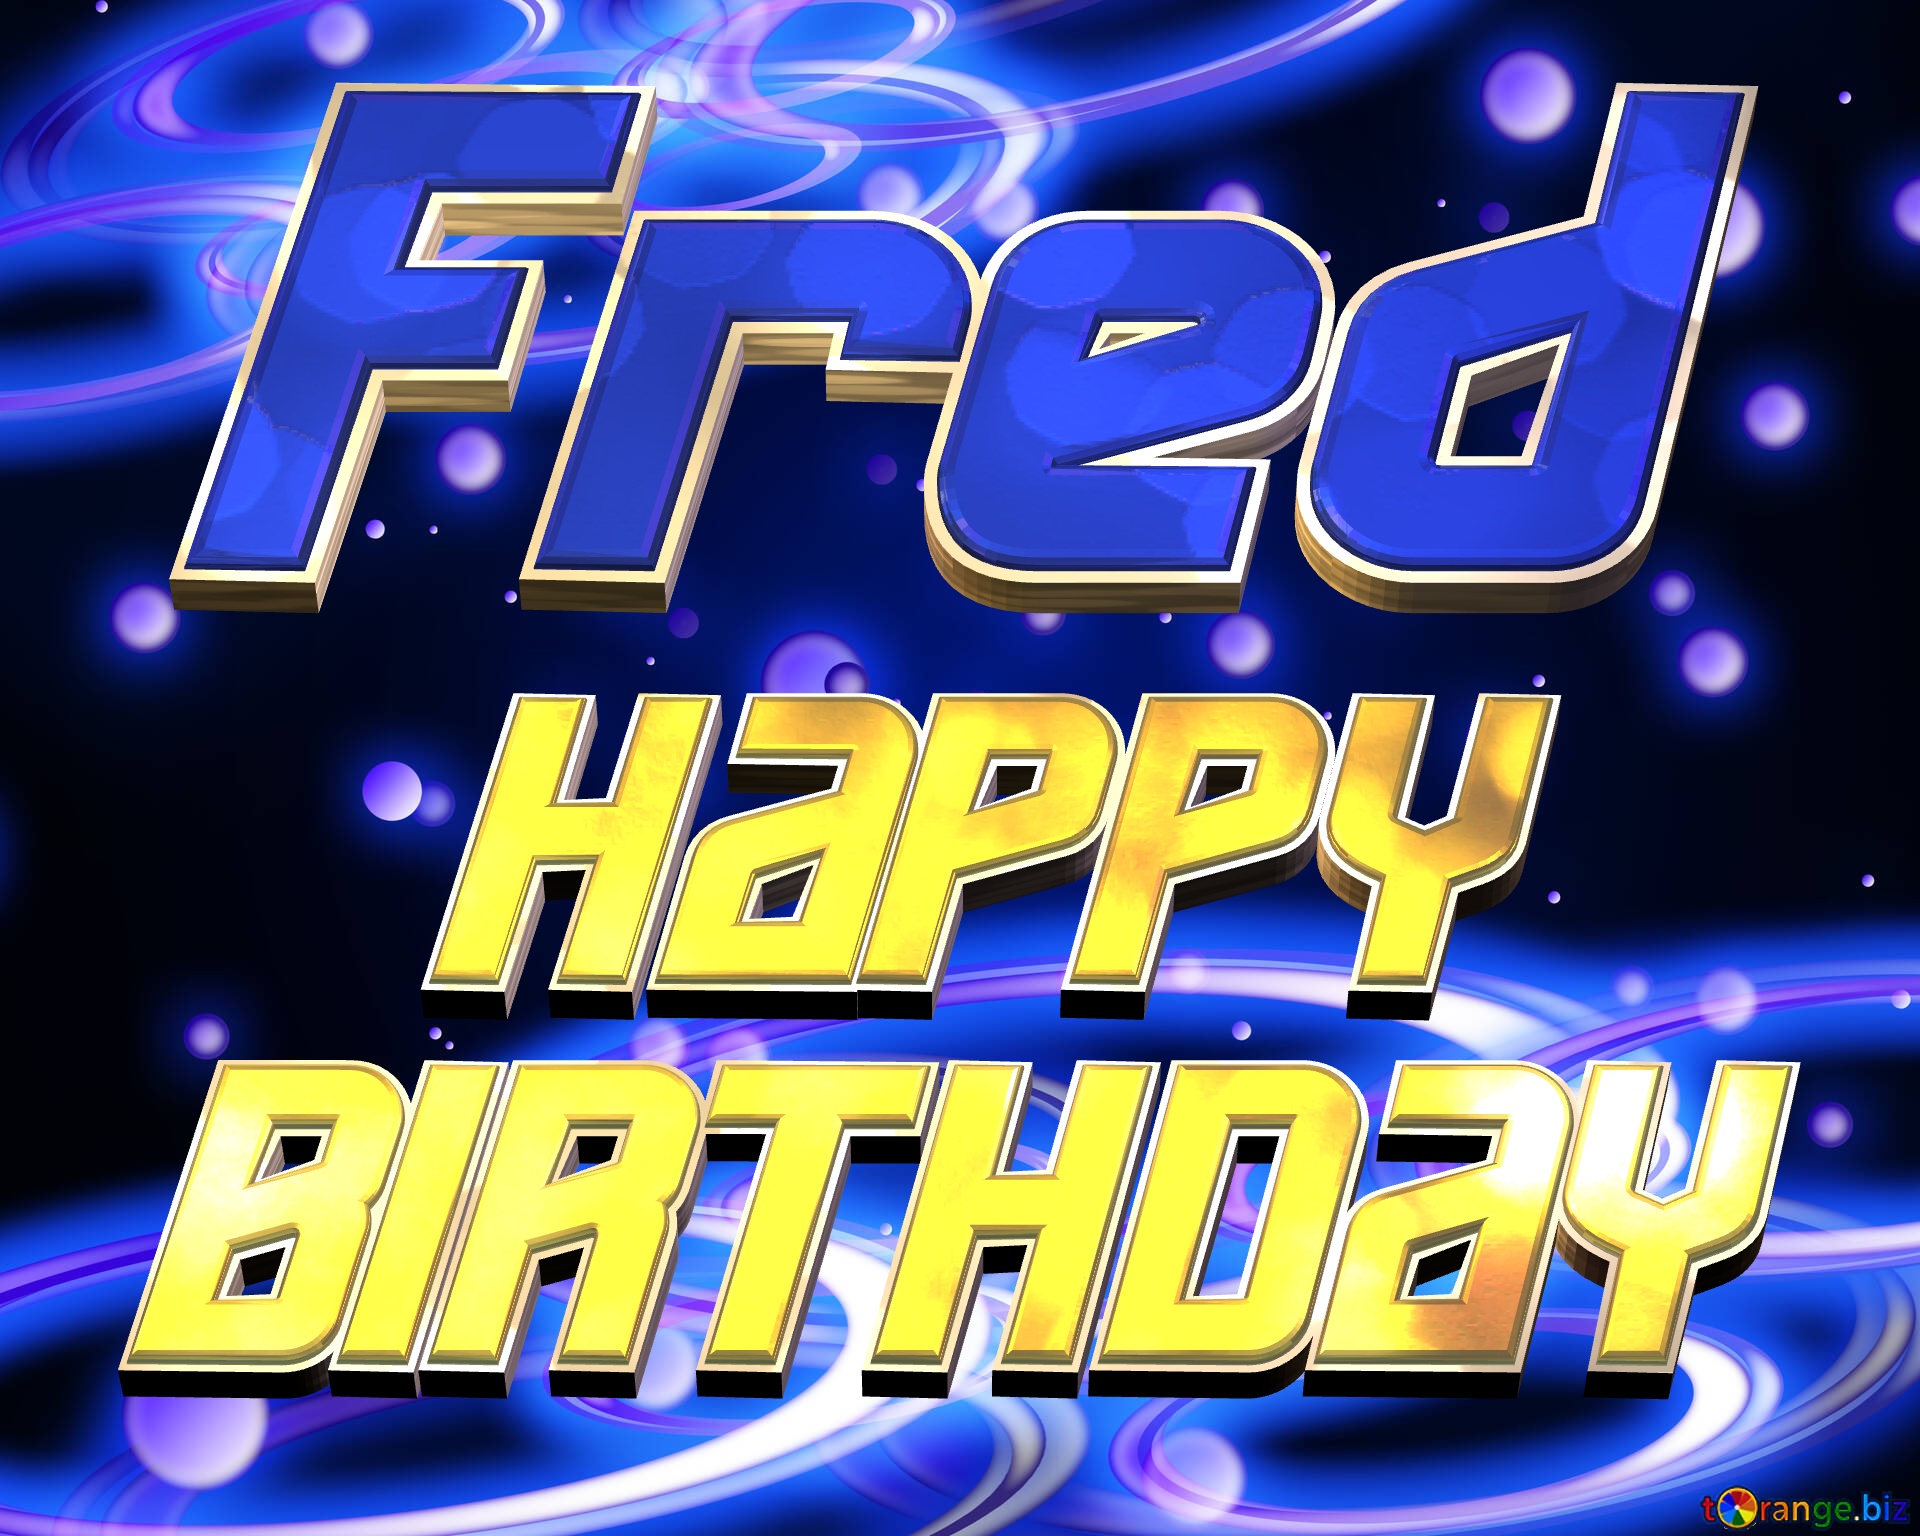 Fred Space Happy Birthday! Technology background №54919